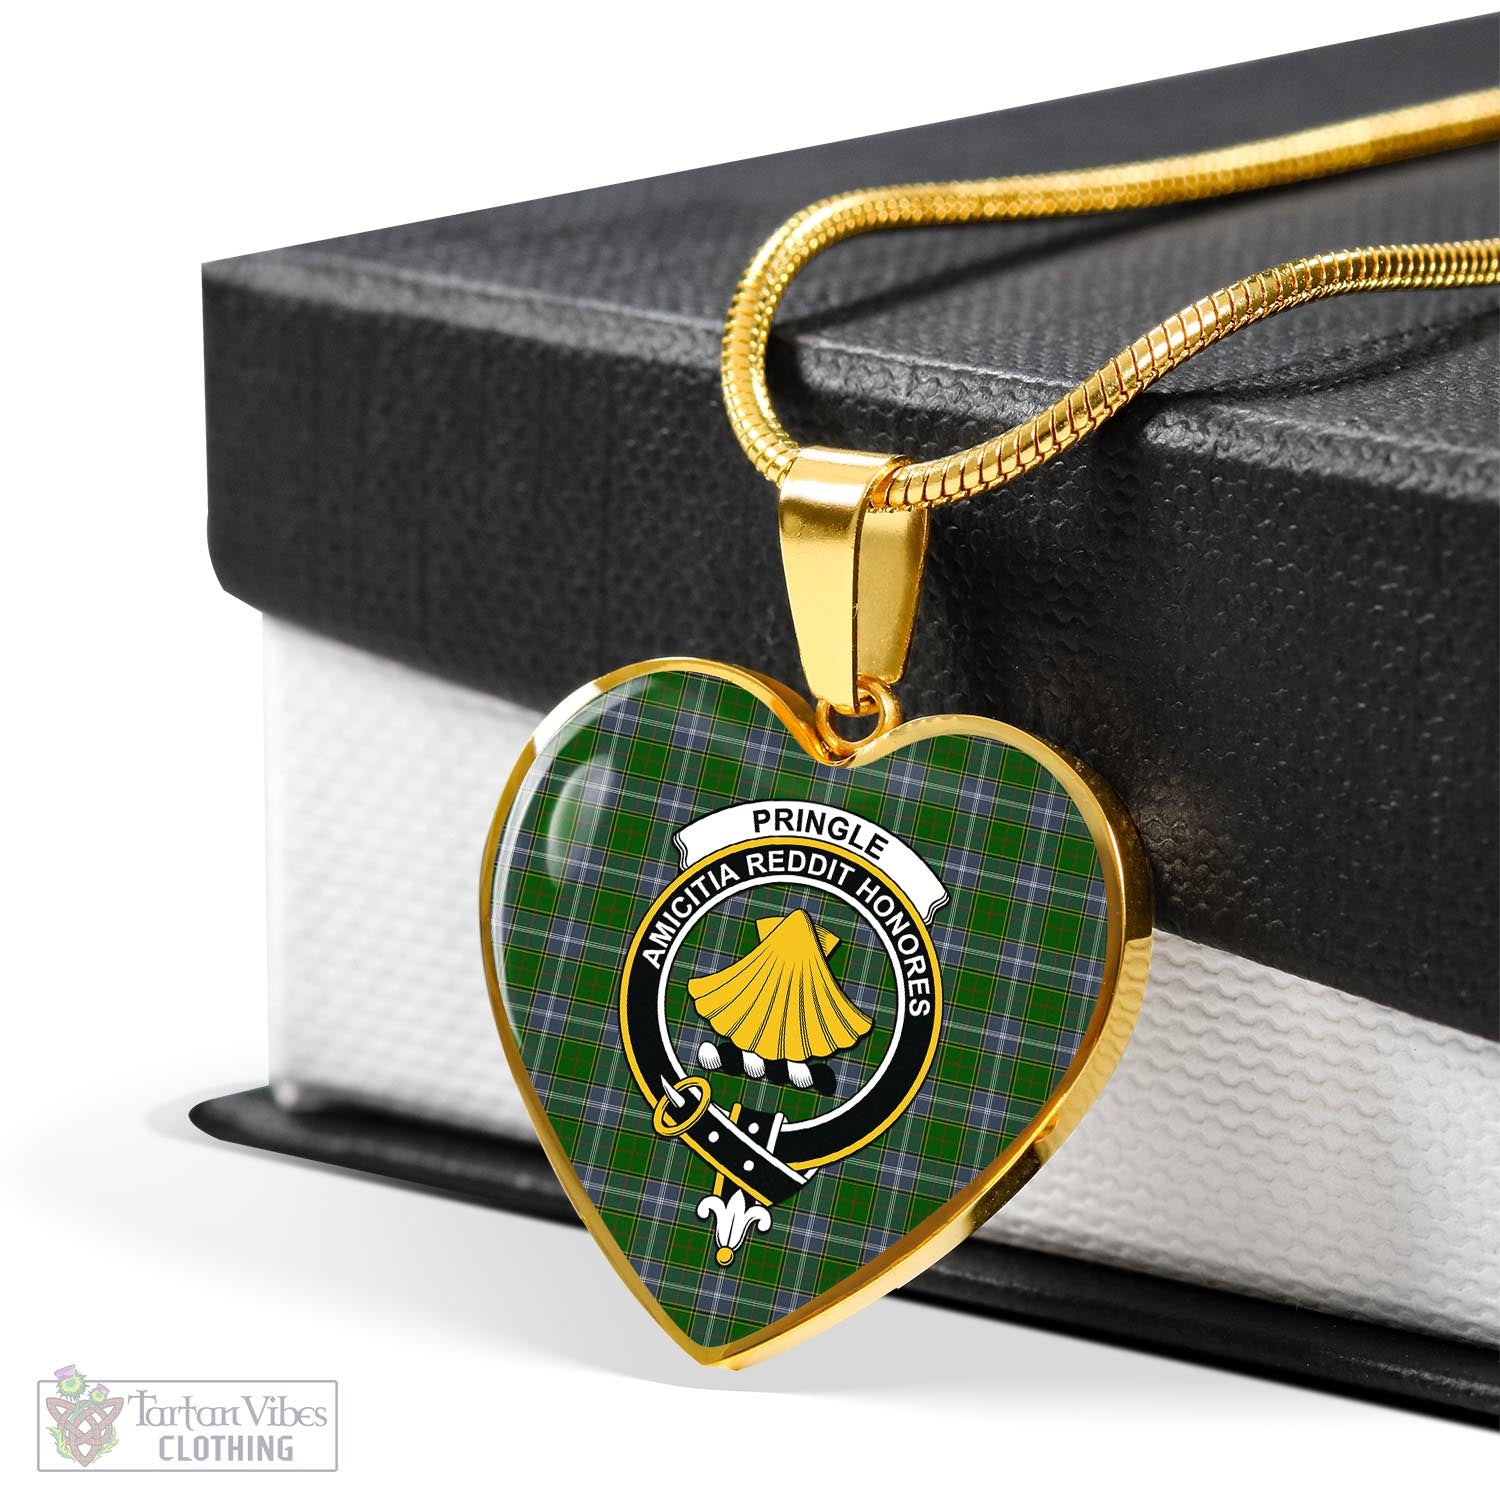 Tartan Vibes Clothing Pringle Tartan Heart Necklace with Family Crest